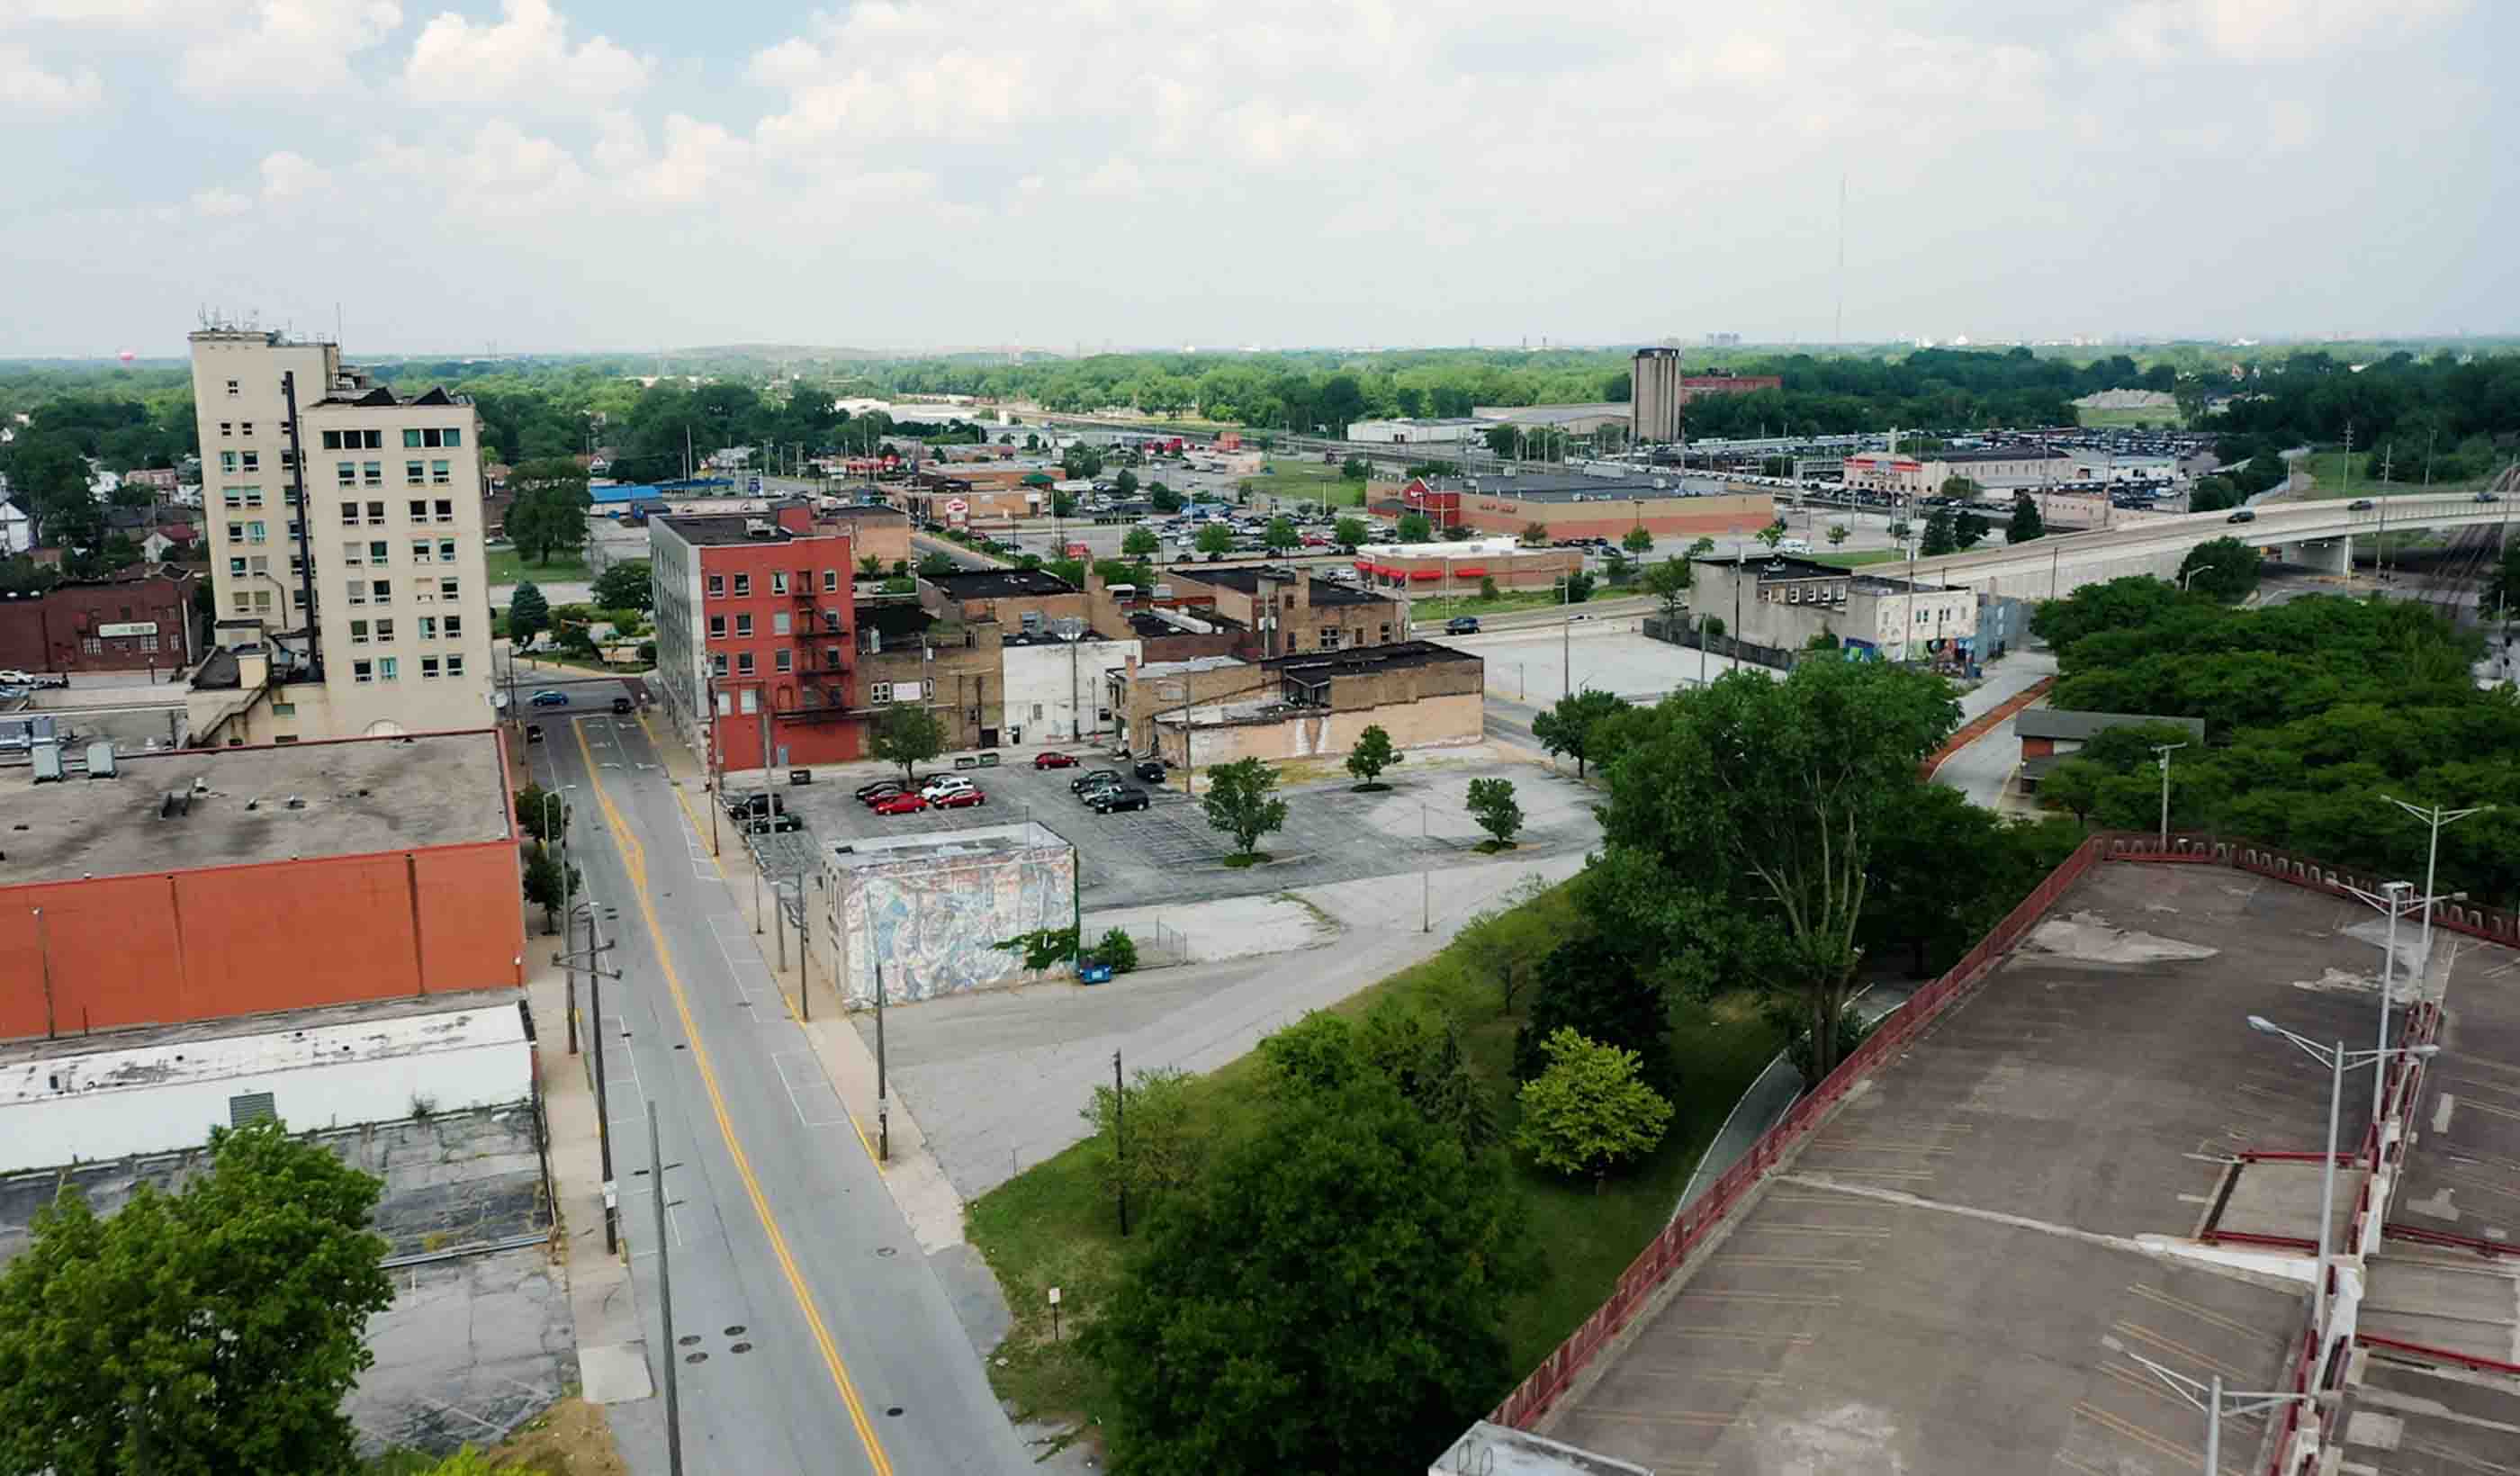 Retrofitting Hammond, IN’s downtown core from car-centric to a walkable neighborhood